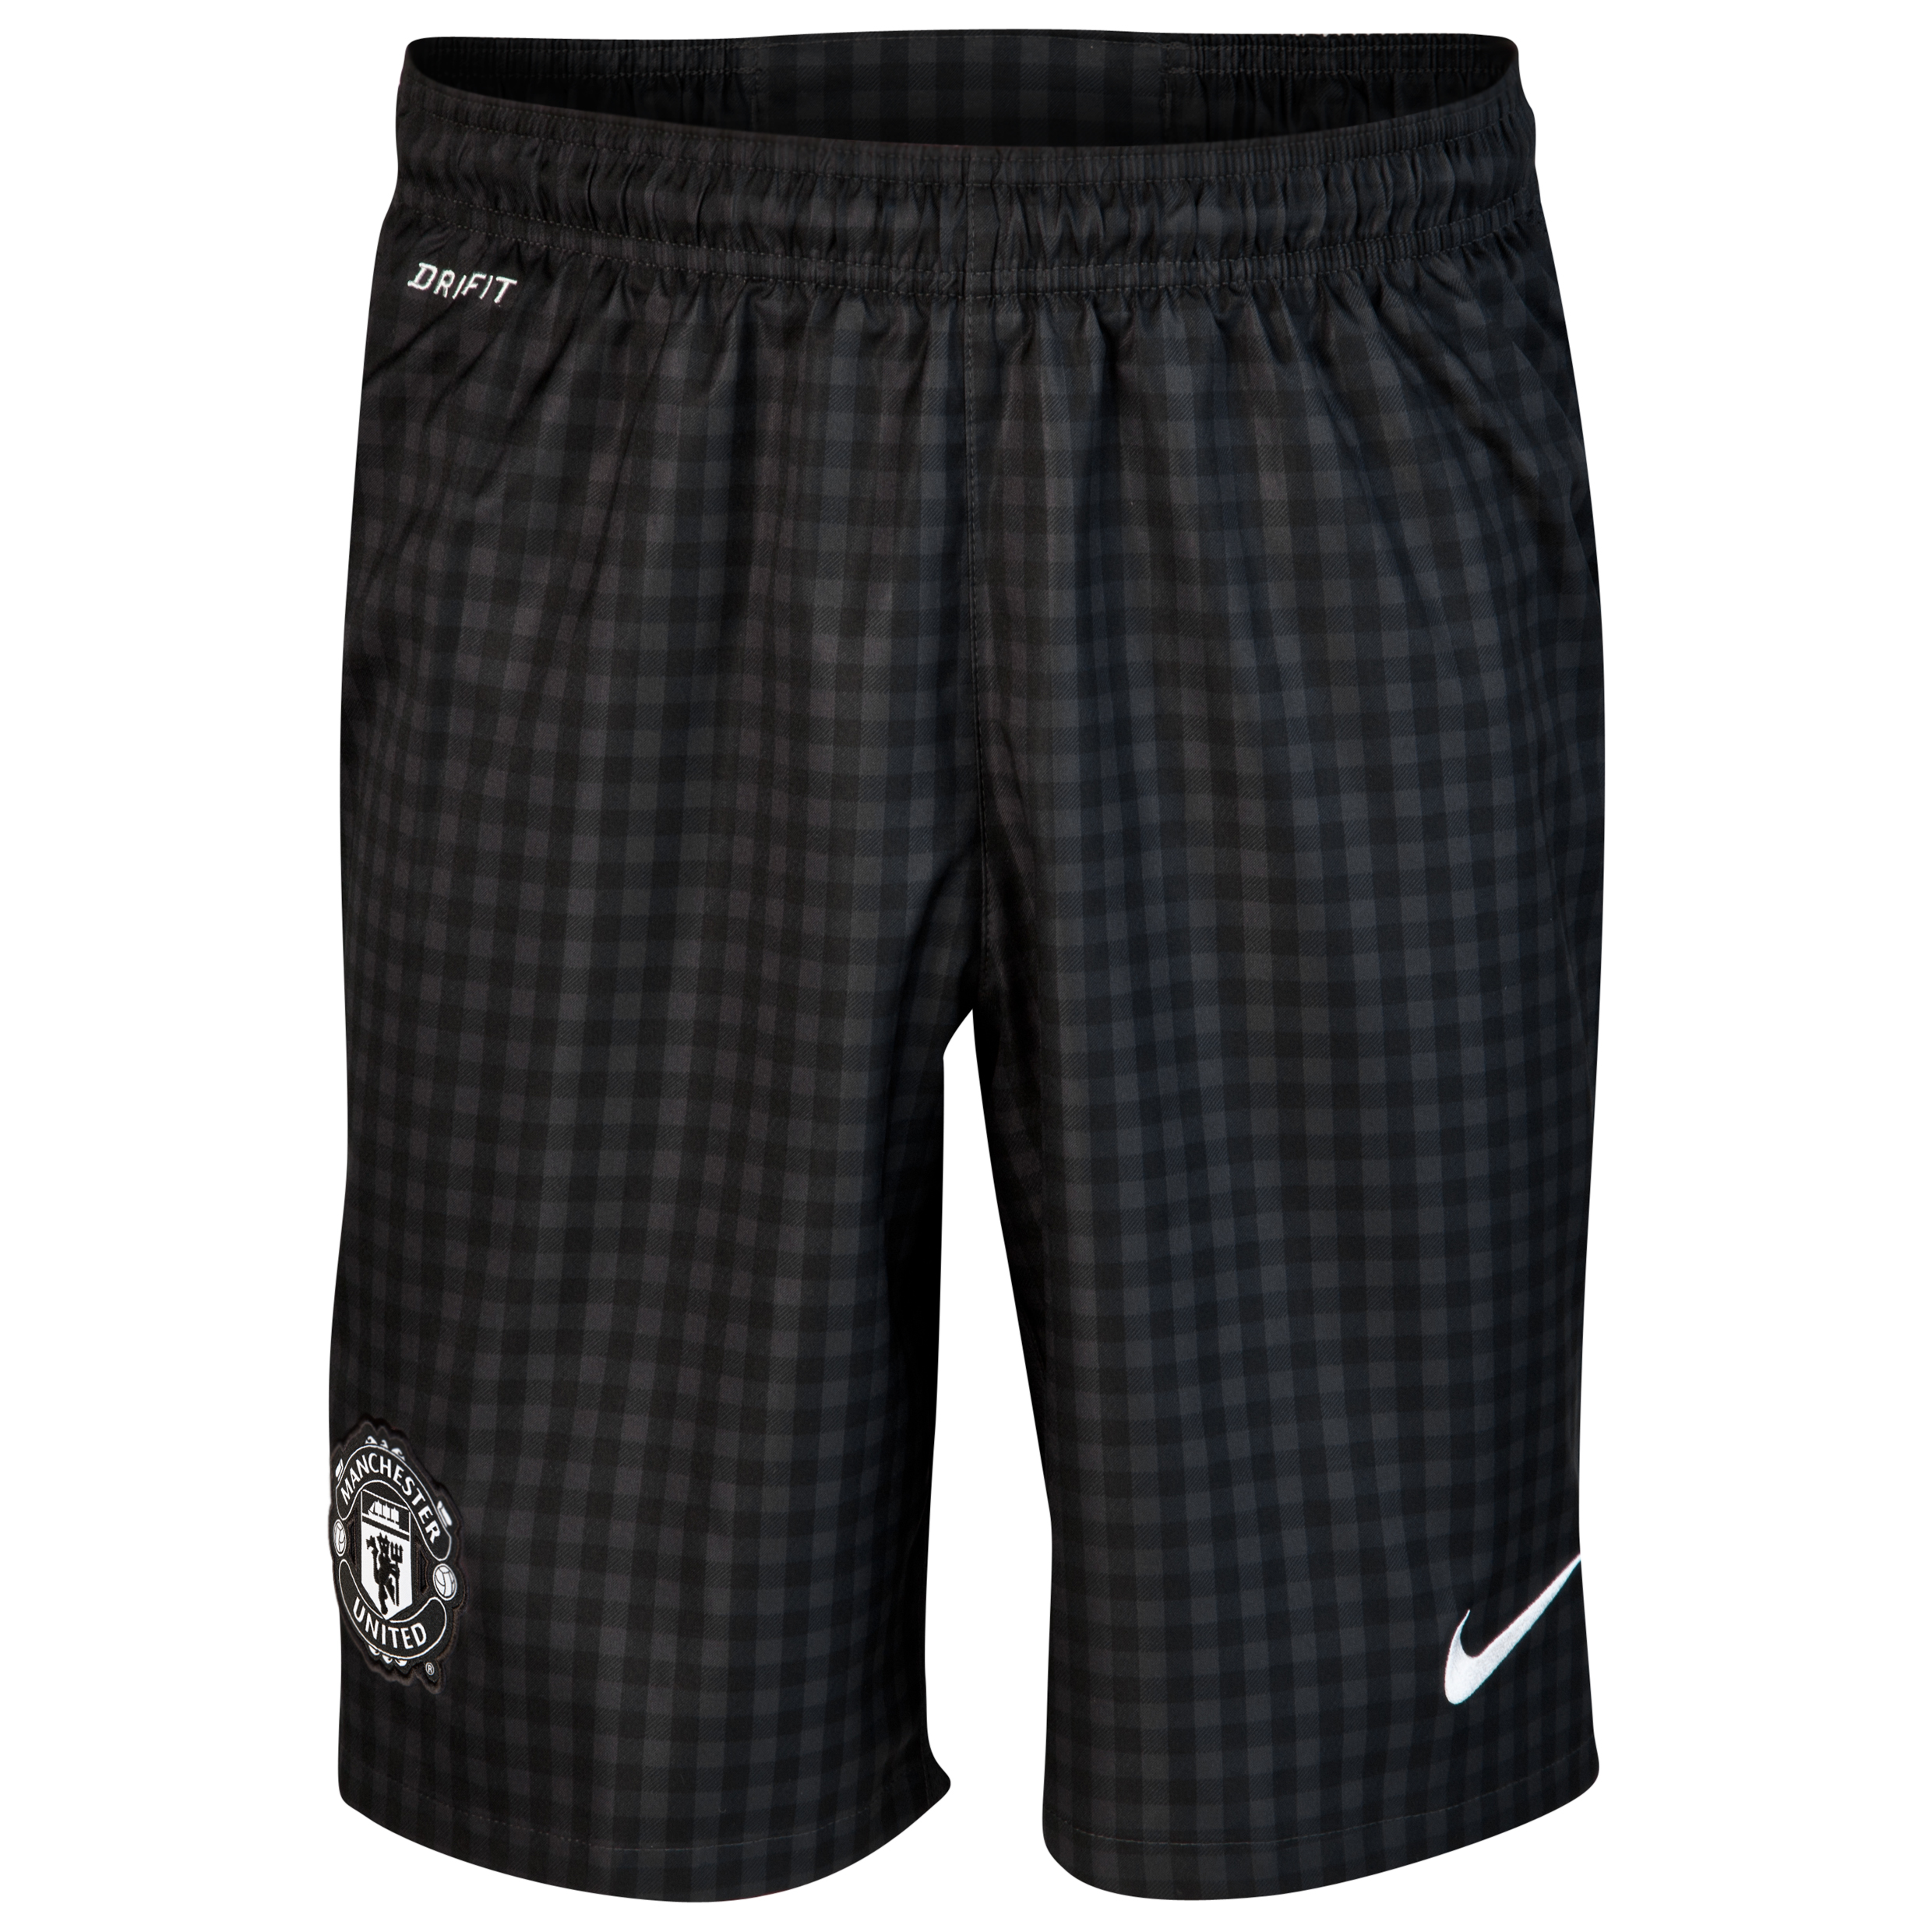 Manchester United Away Short 2012/13 - Youths